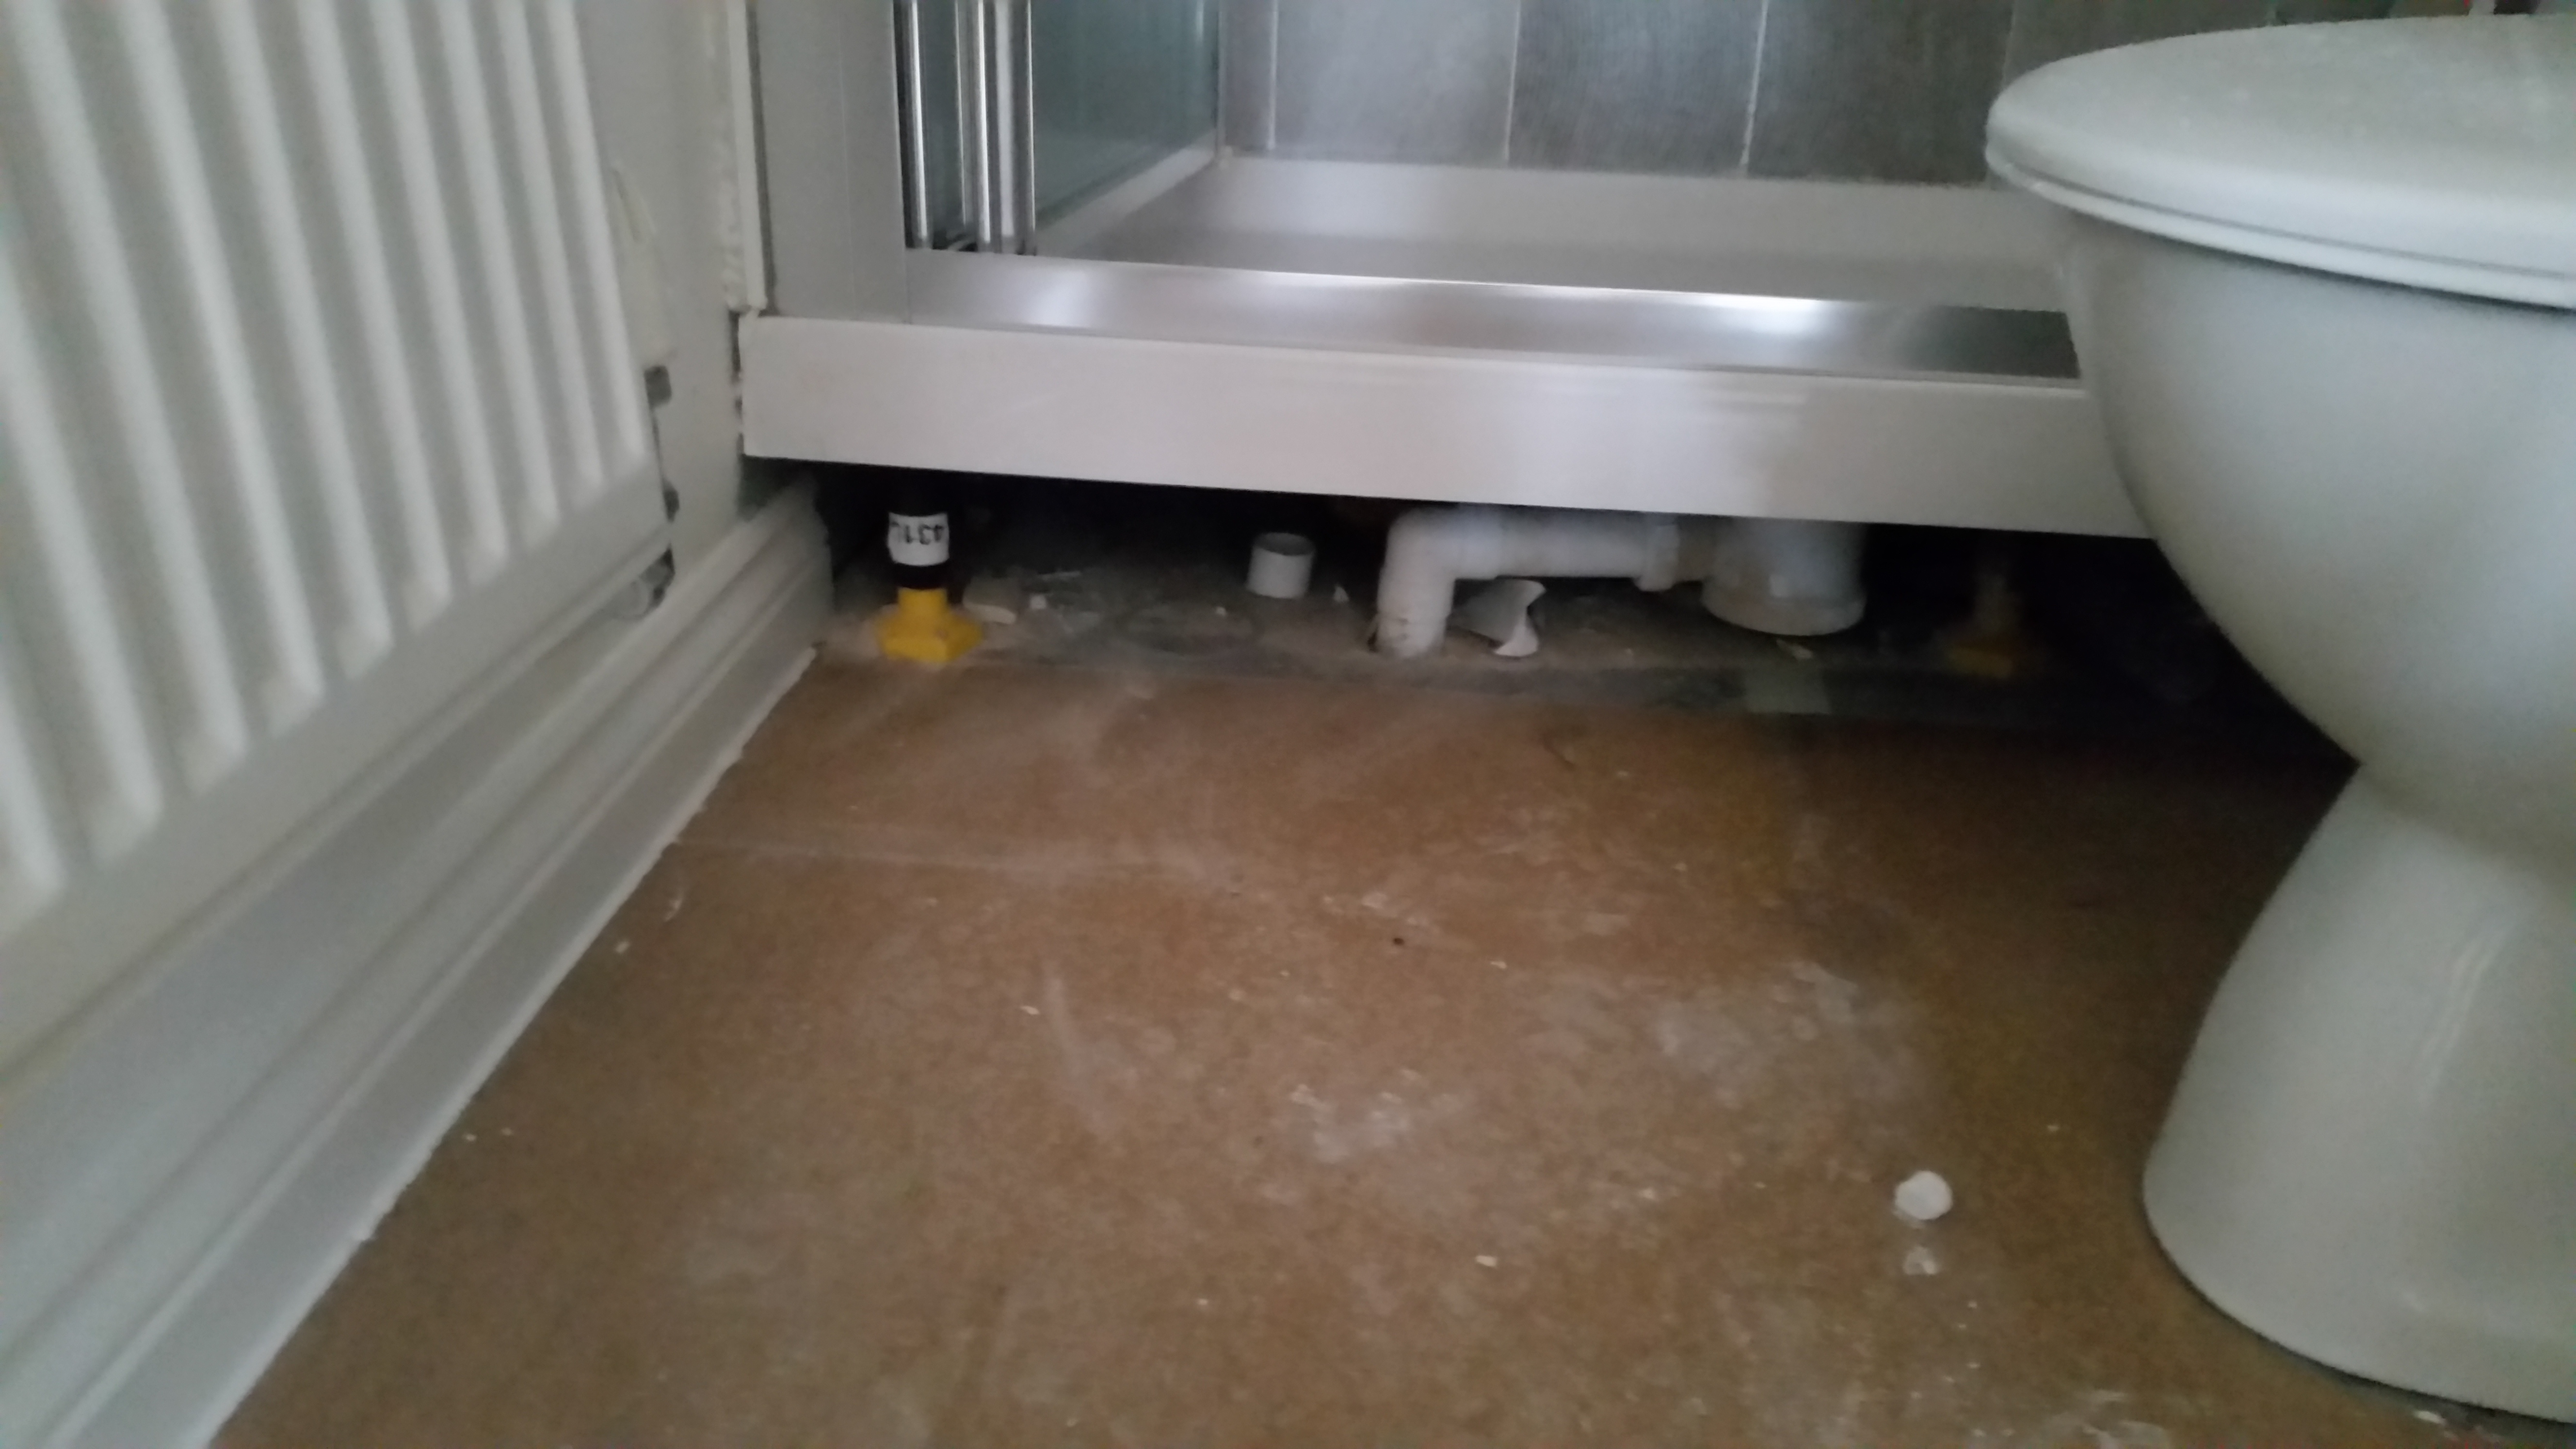 Fill any gaps under the shower tray and fit the front.